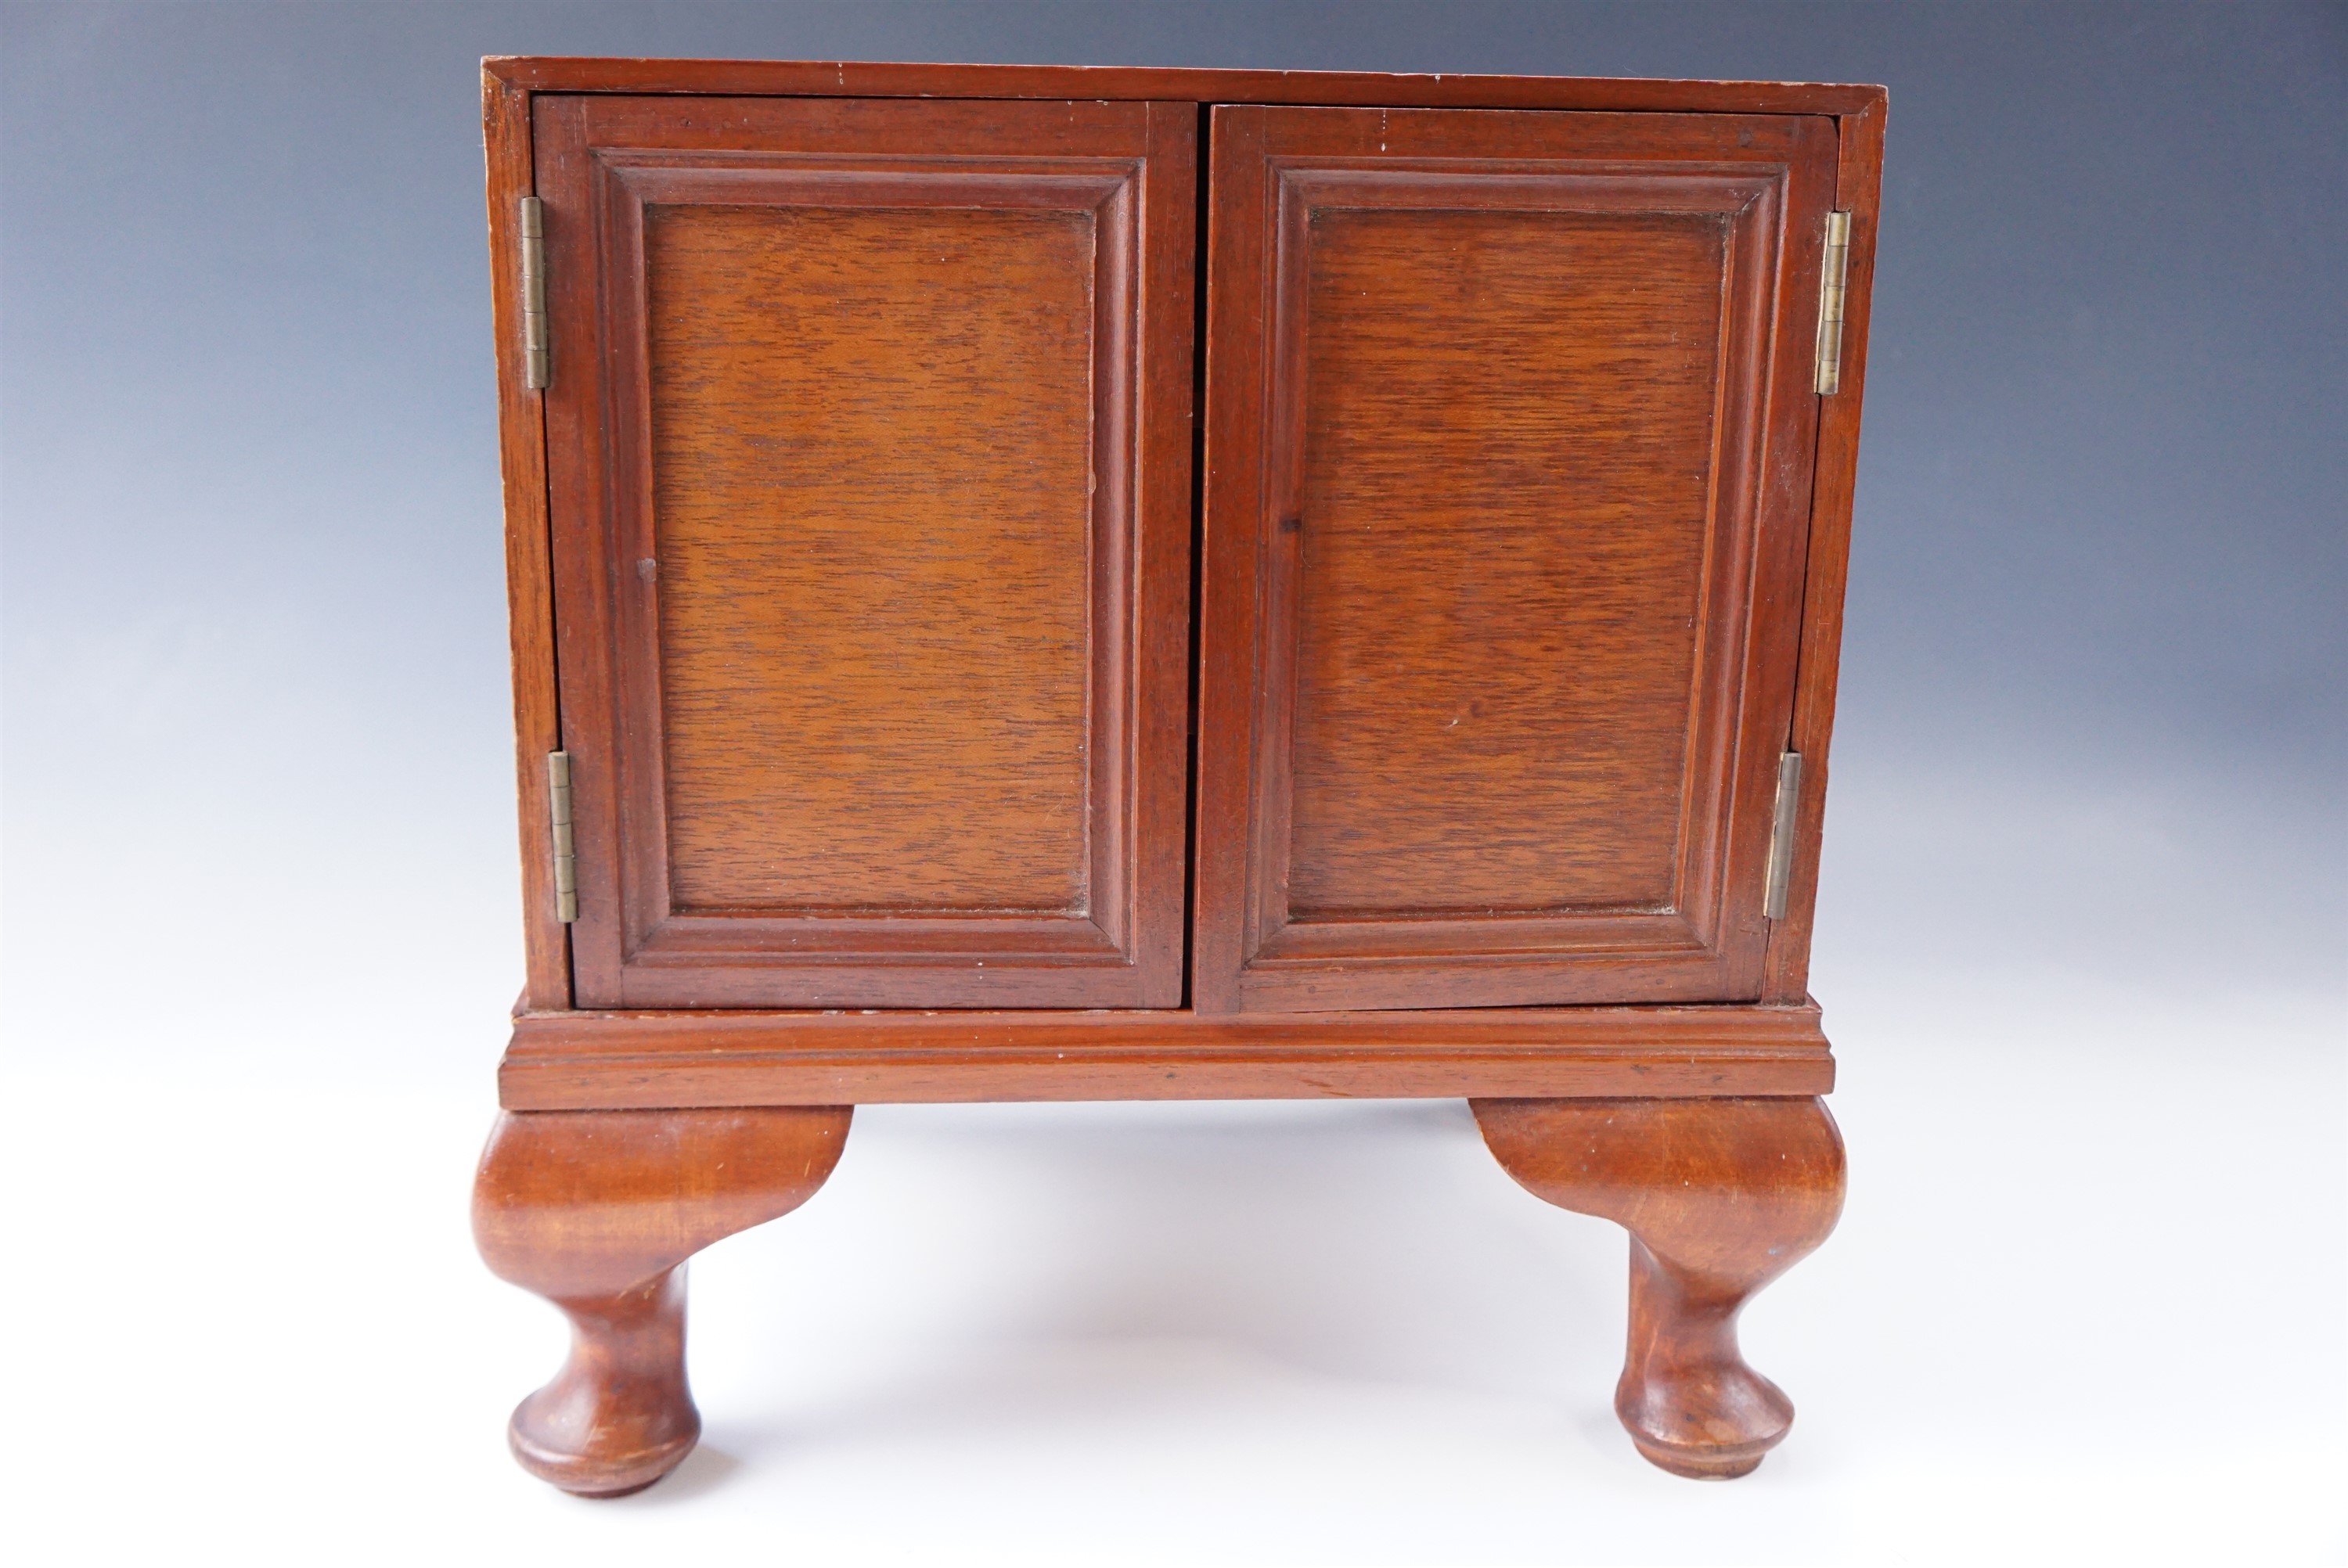 A small mahogany cabinet with two doors, 32 x 26 x 33 cm